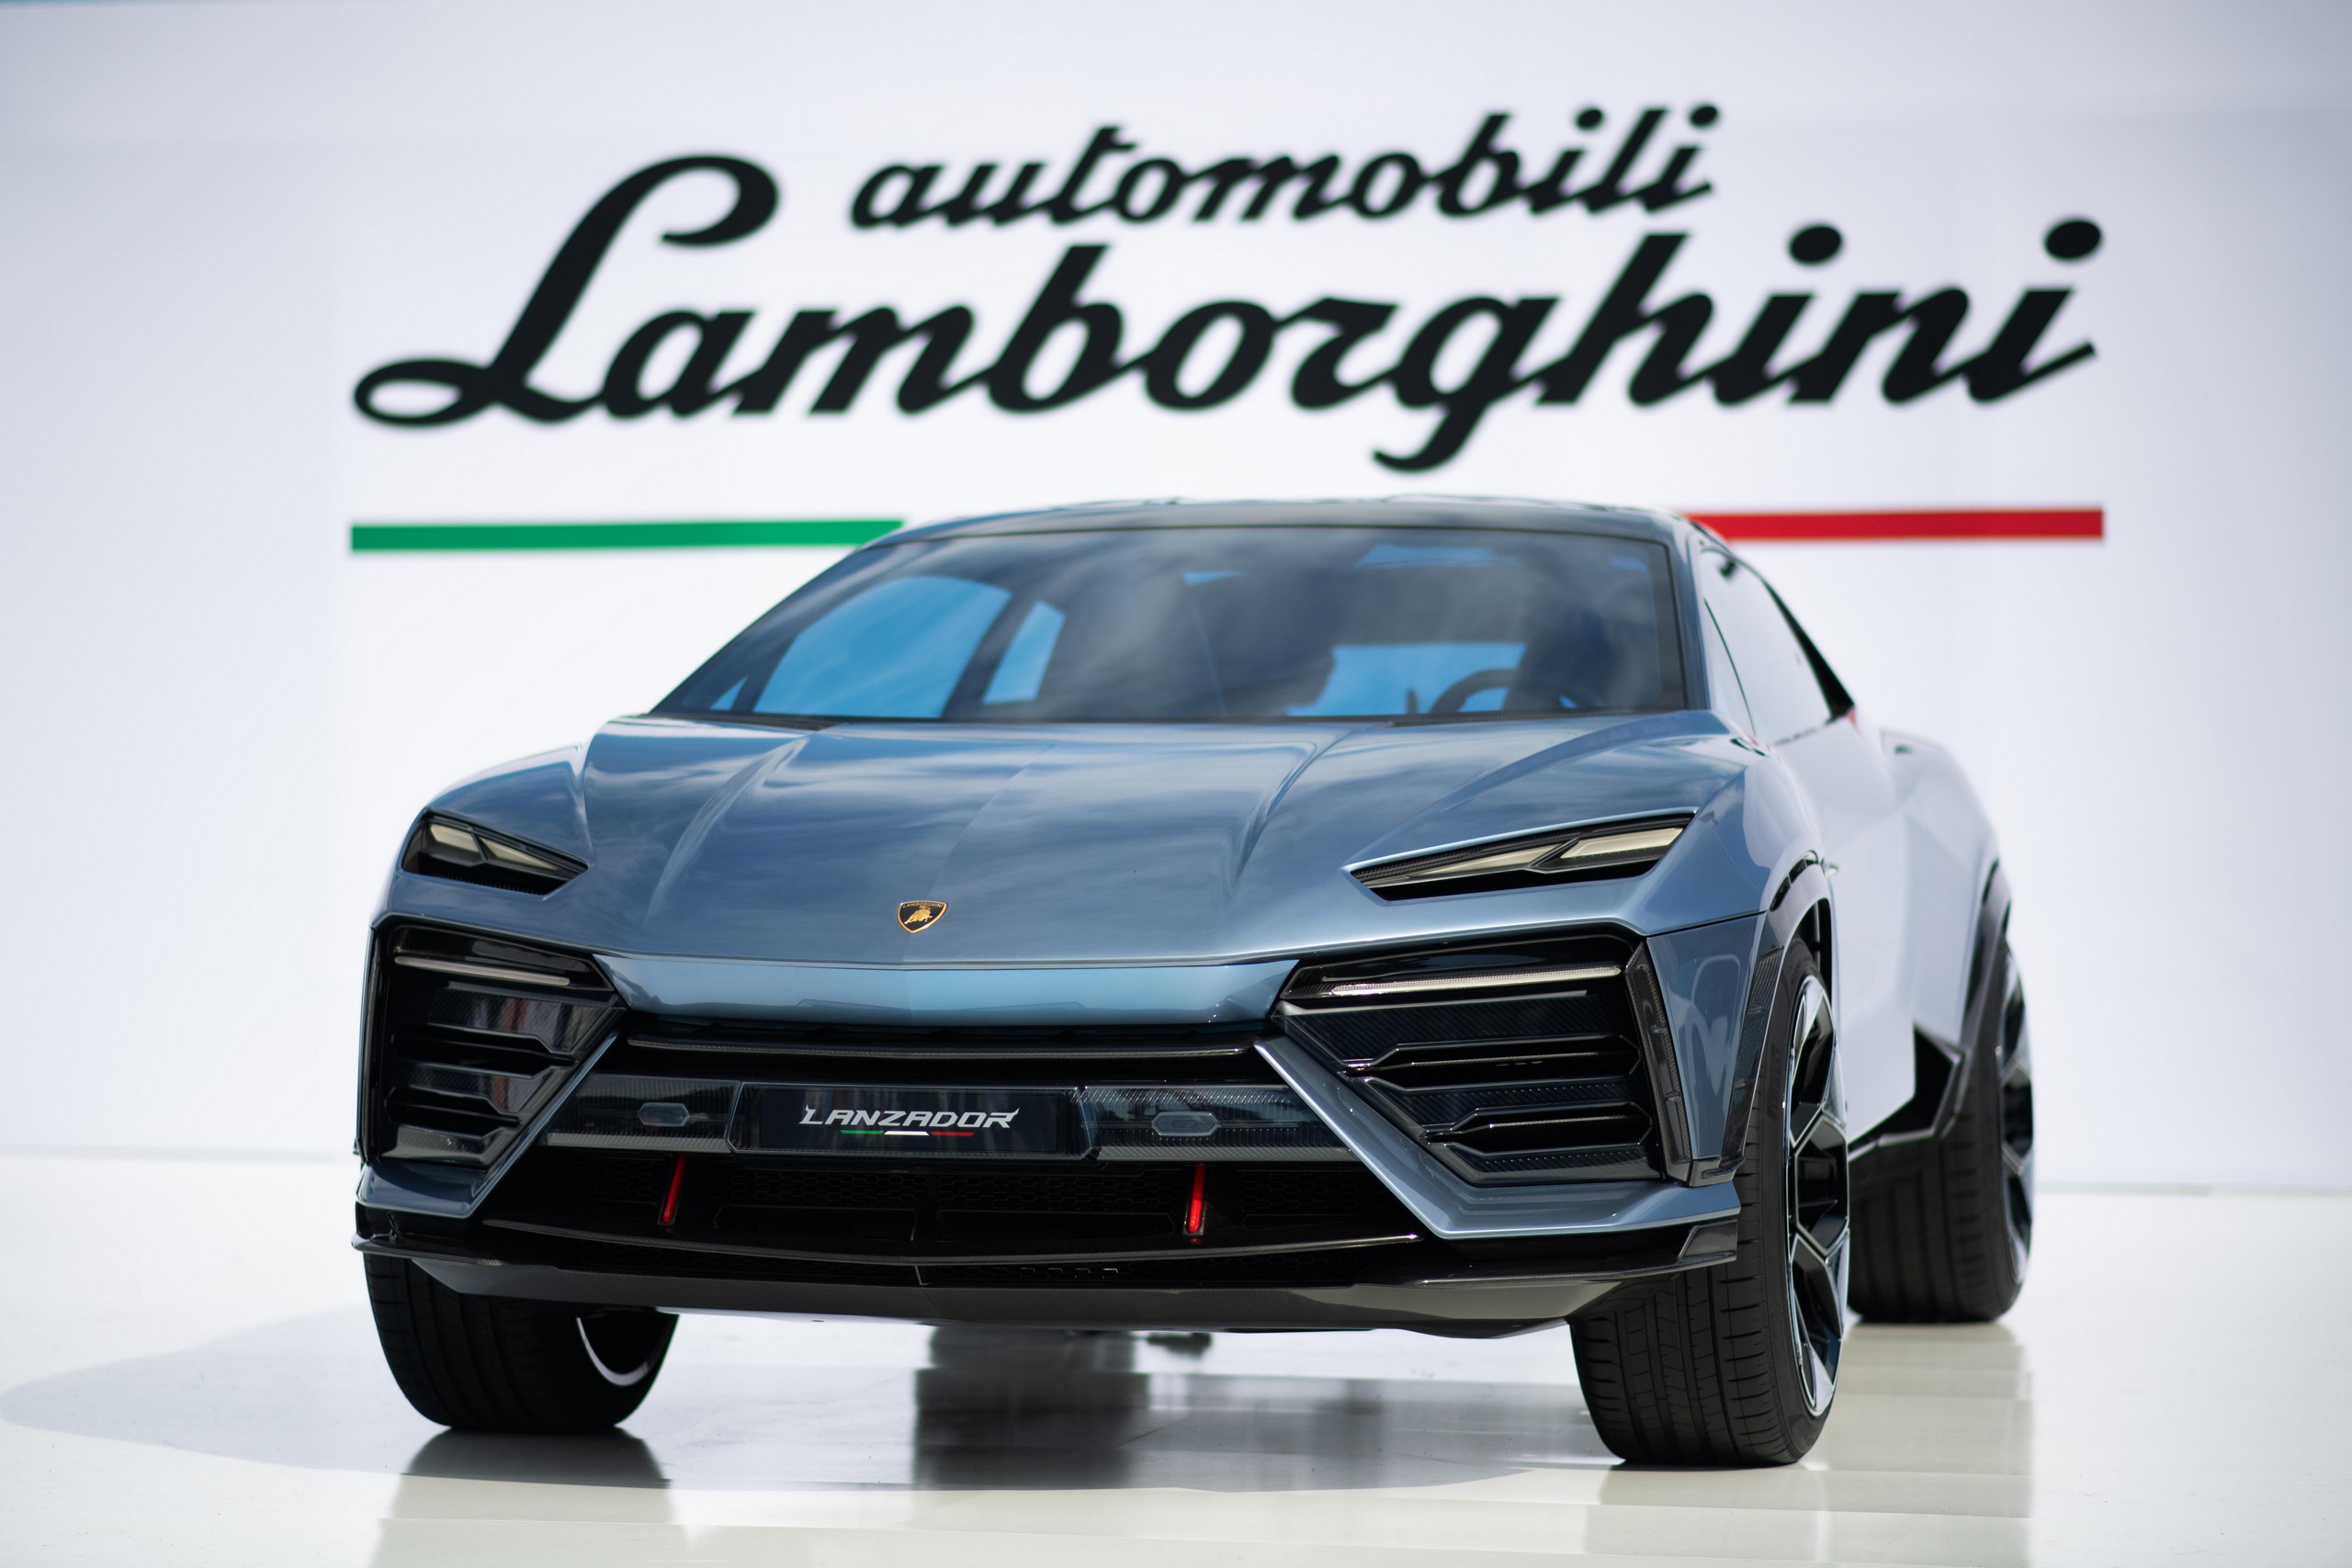 New Lamborghini Lanzador Electric Crossover Looks Stunning In Real Life